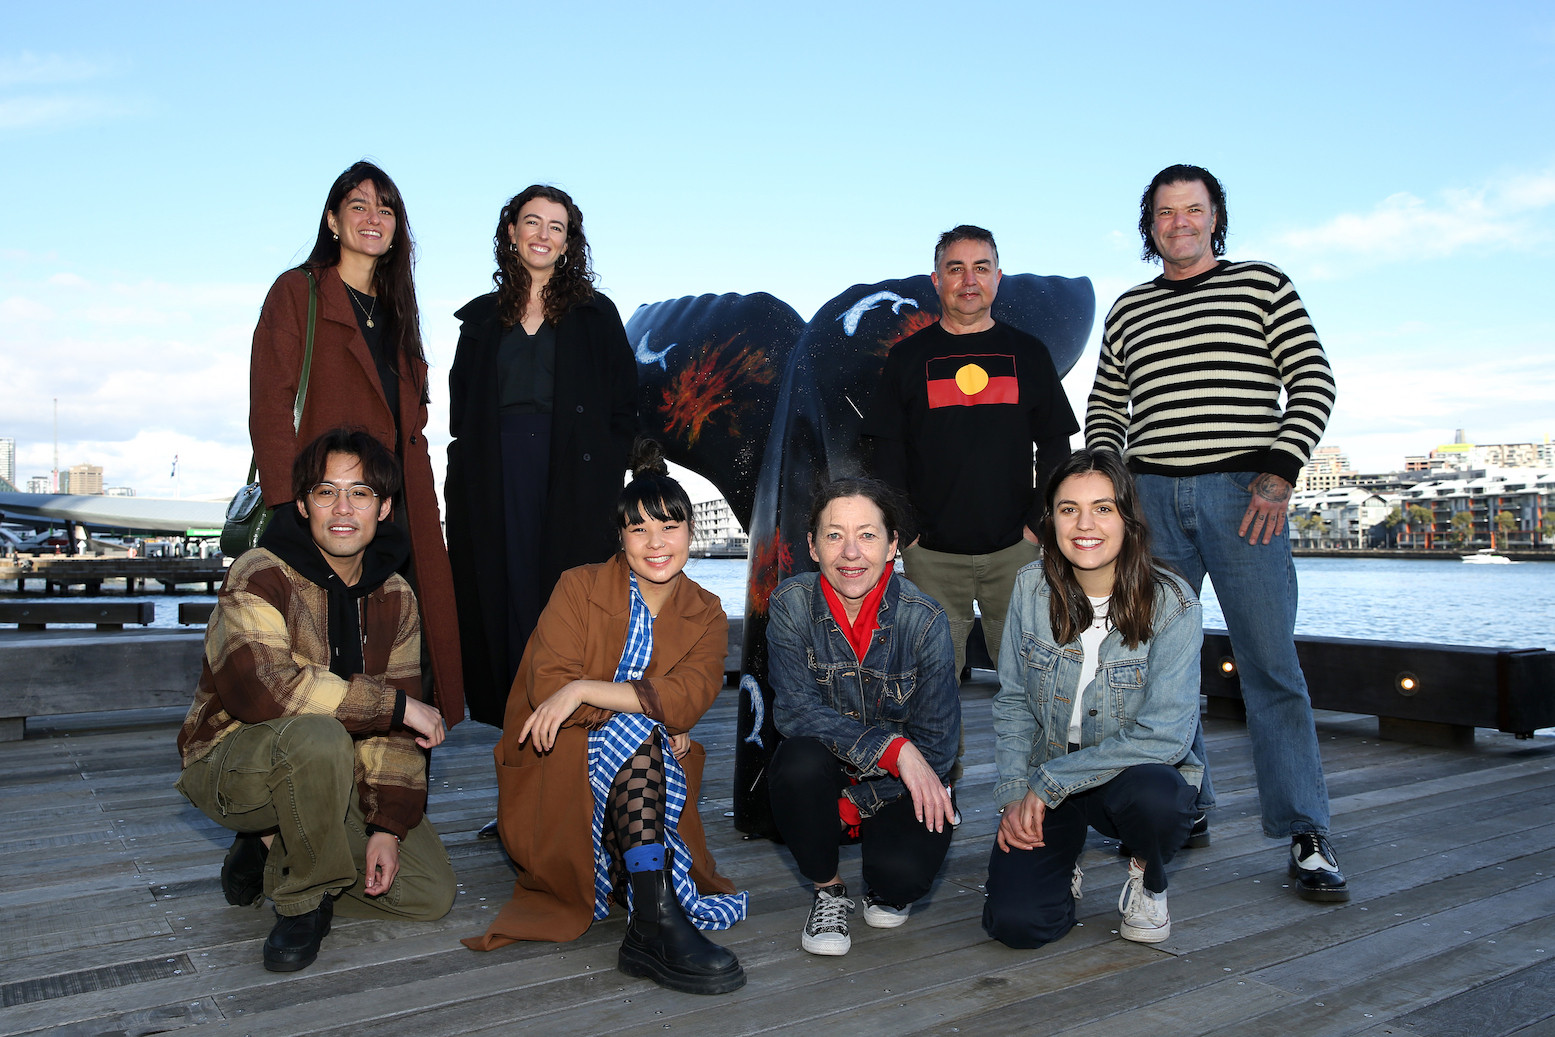 Indigenous Curatorial Advisors Auntie Joanne Selfe and Uncle Graham Toomey with artists and Art Pharmacy team in front of  Graham Toomey’s artwork ‘Whale Dreaming’ for the Whale Tale Public Sculpture Trail.